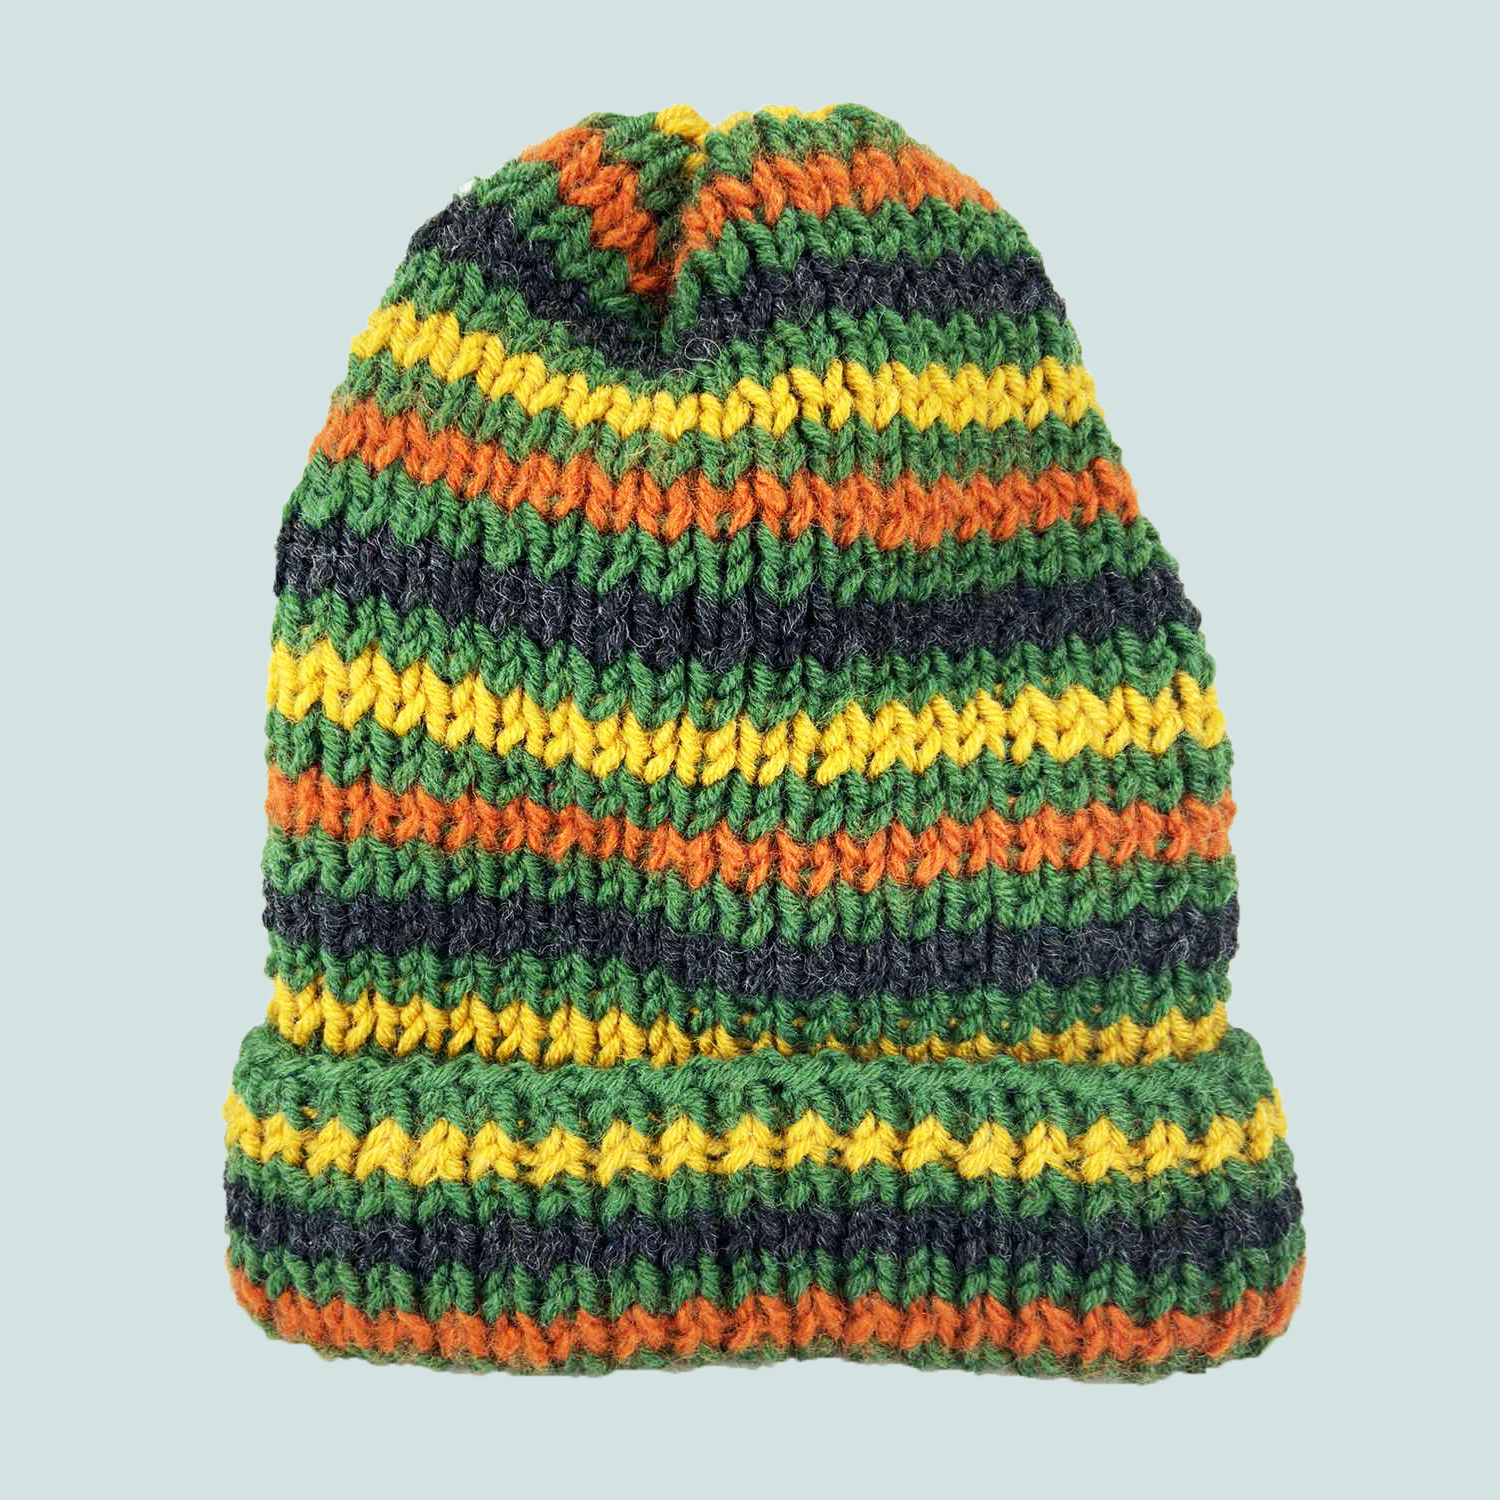 Knitted hat in strips